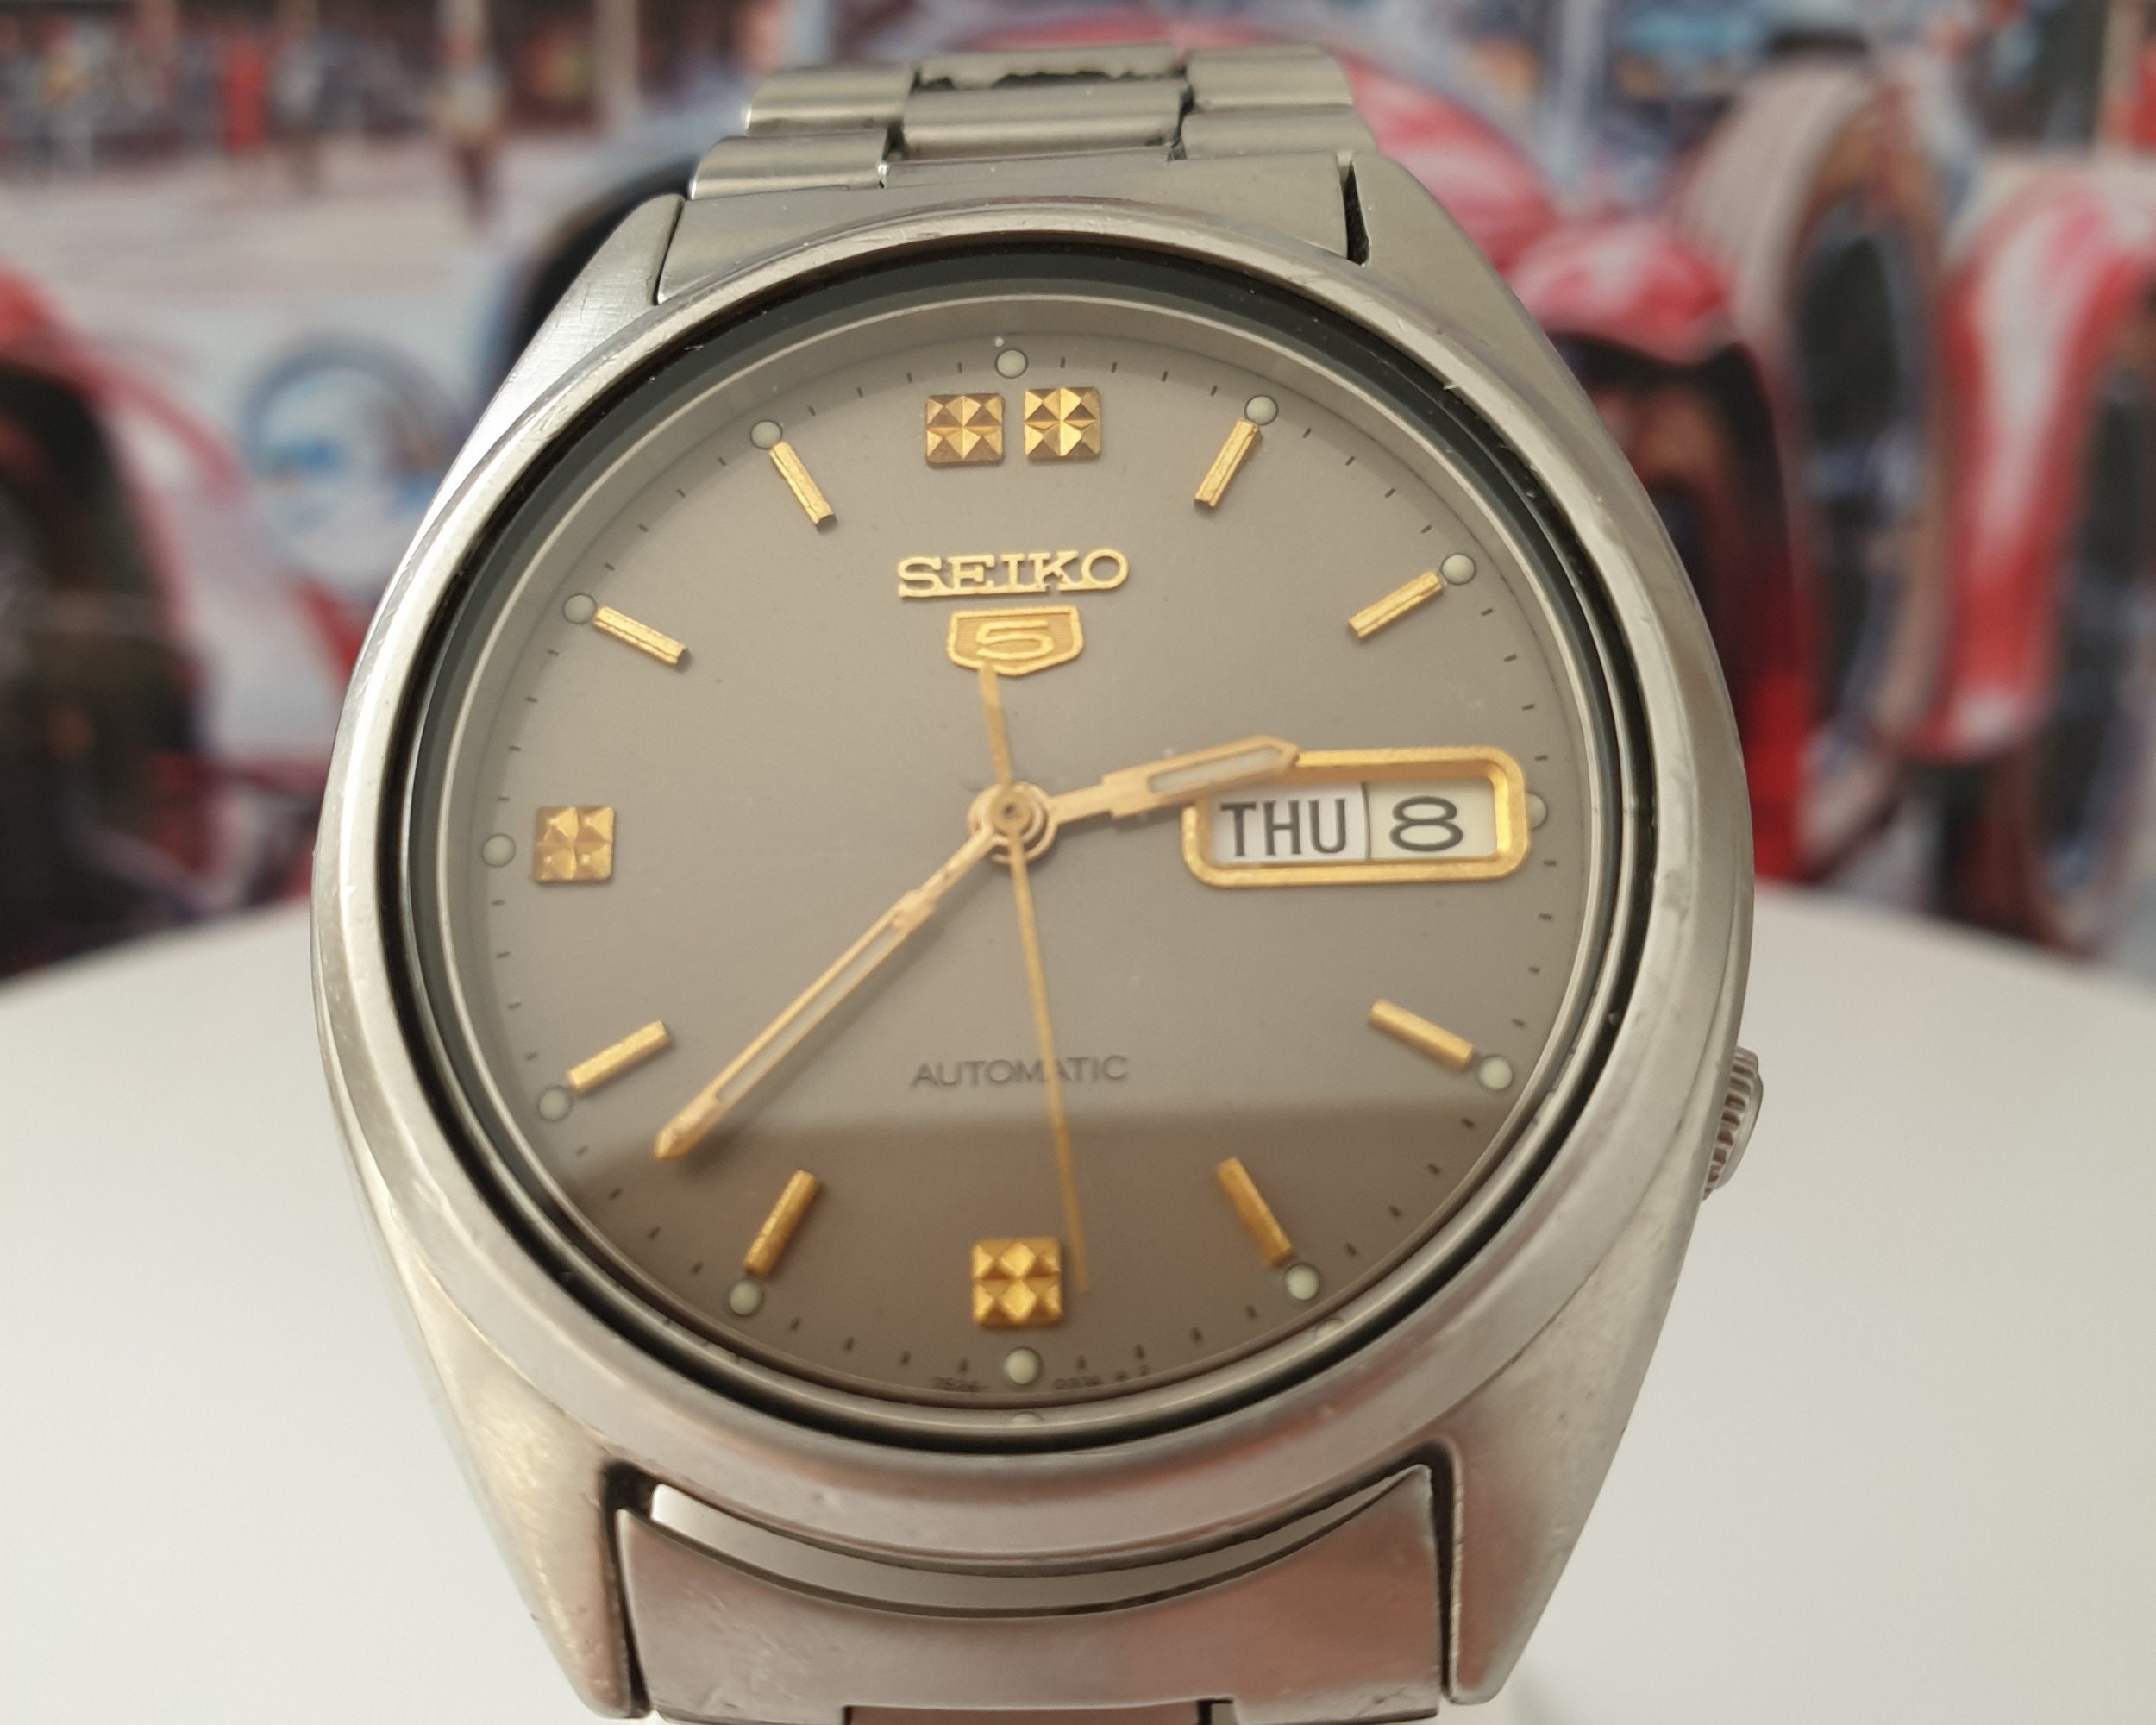 Seiko 5 Automatic Movement 7S26-3040 Cal. 1990's Vintage - Etsy